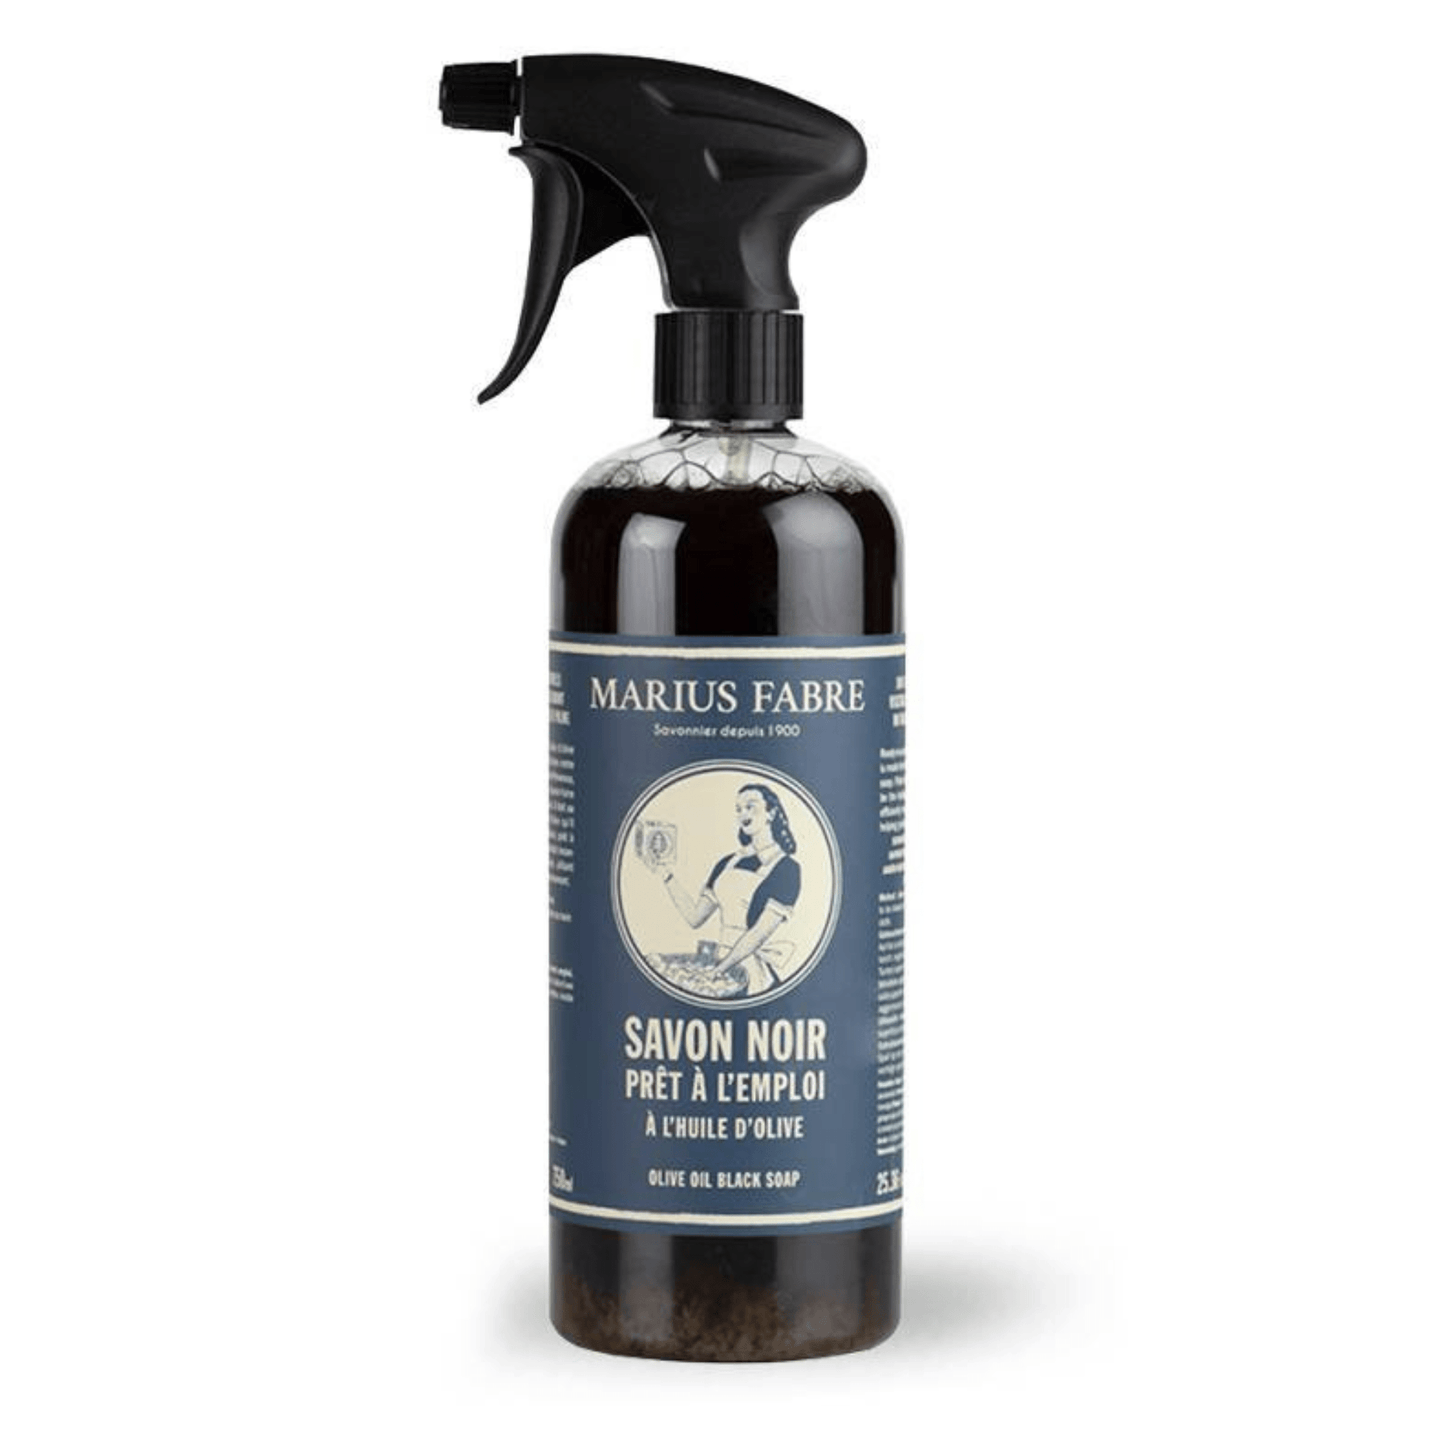 Primary Image of Olive Oil Liquid Black Soap Cleaning Spray